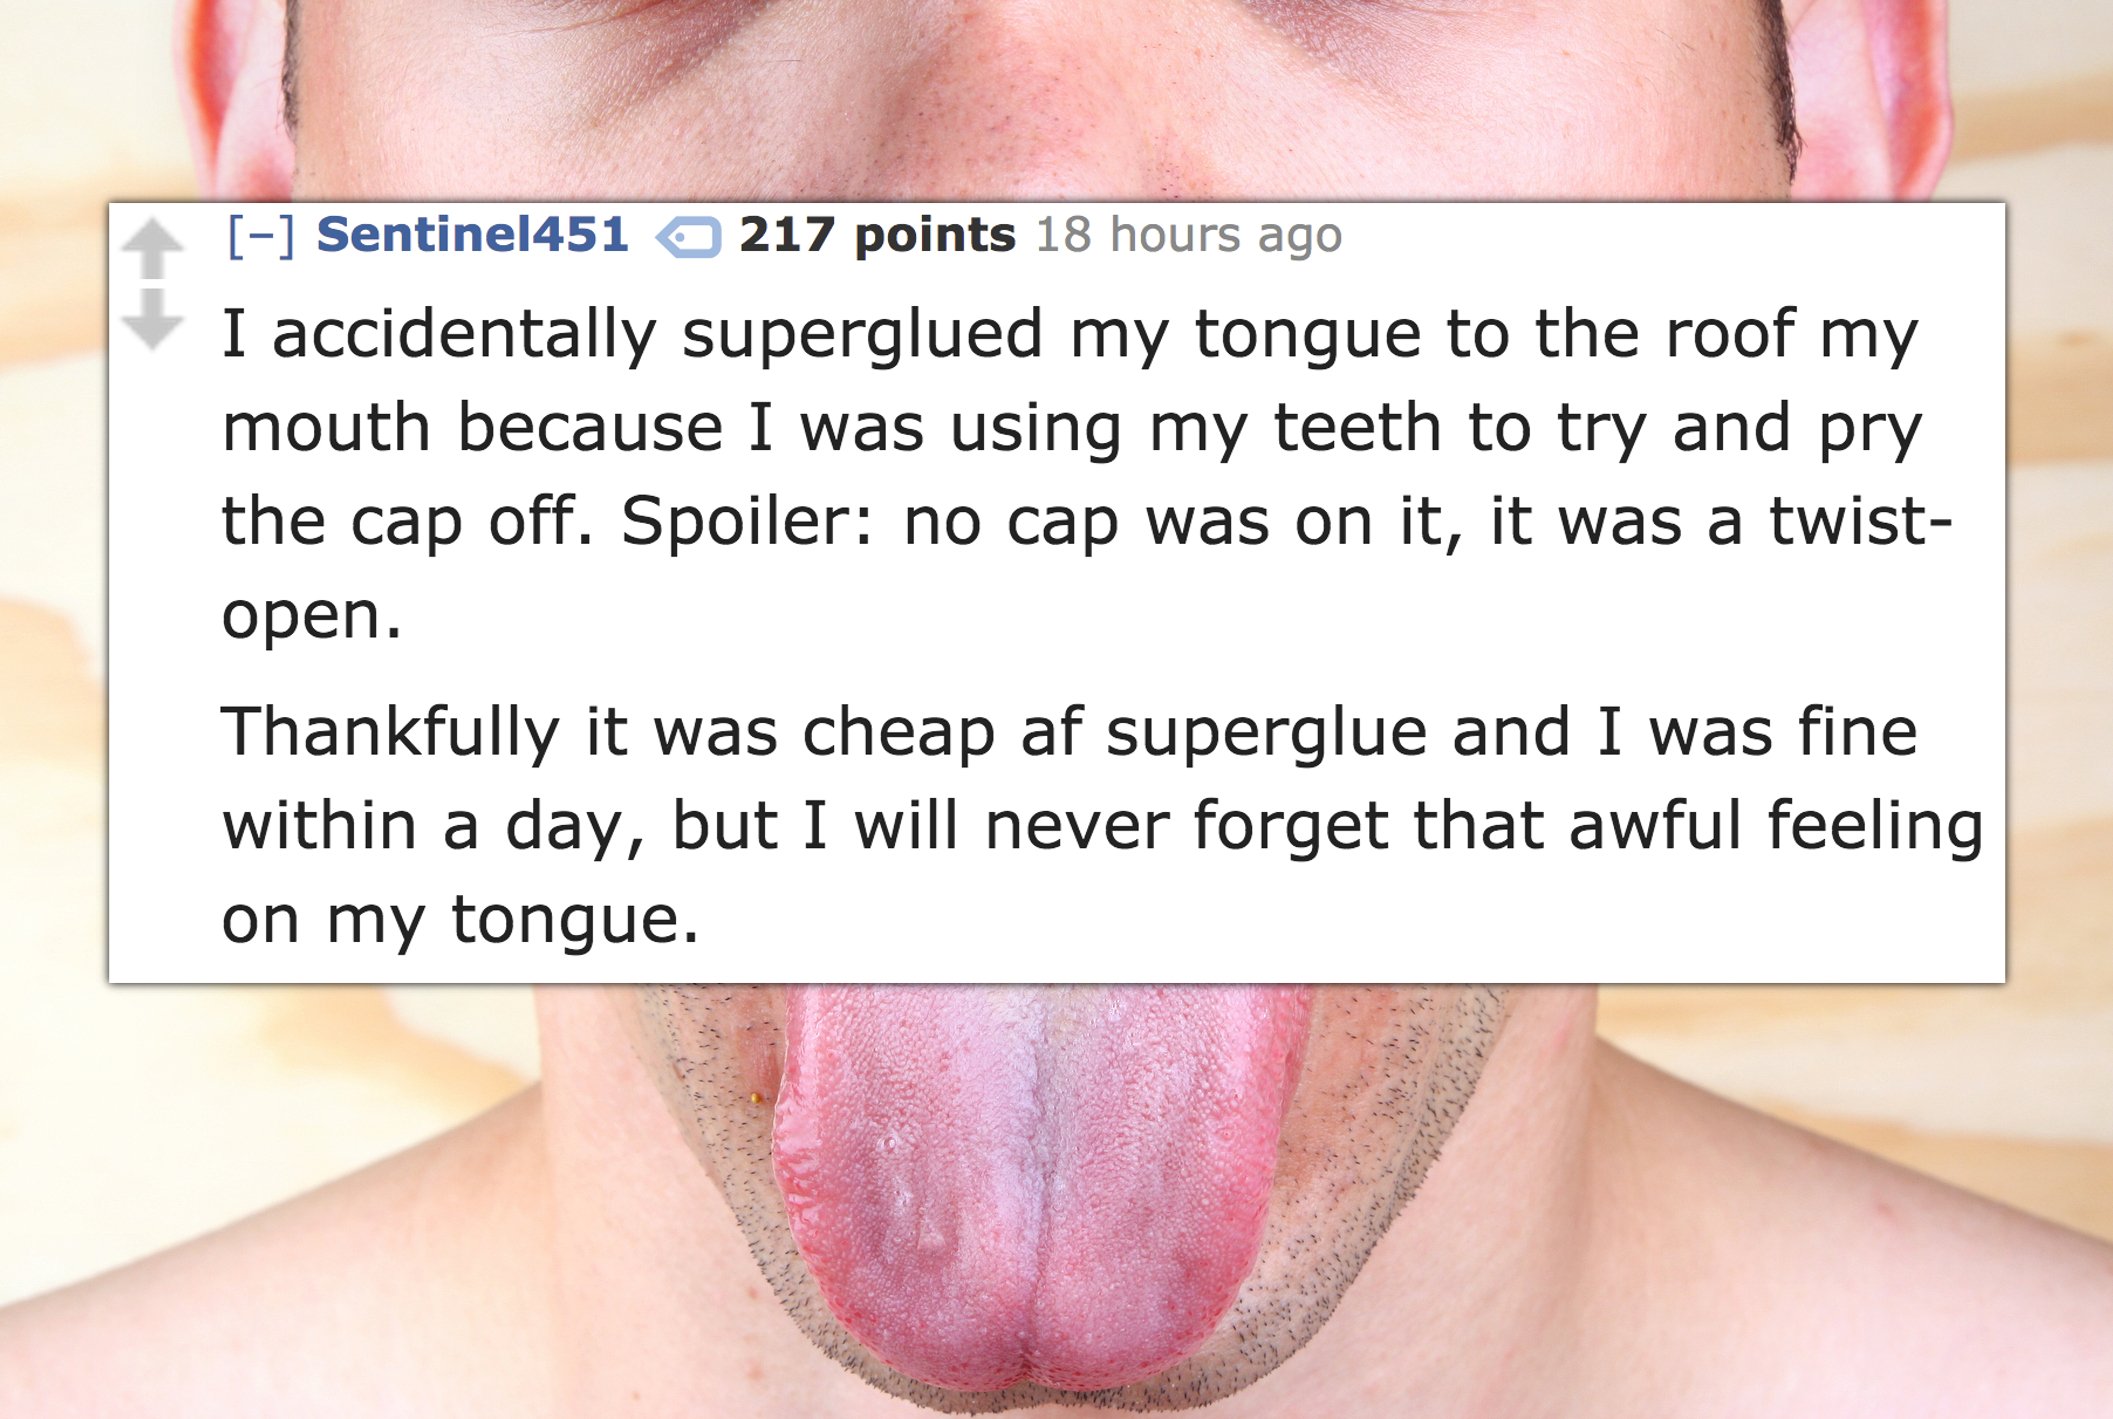 we want you - Sentinel451 217 points 18 hours ago I accidentally superglued my tongue to the roof my mouth because I was using my teeth to try and pry the cap off. Spoiler no cap was on it, it was a twist open. Thankfully it was cheap af superglue and I w